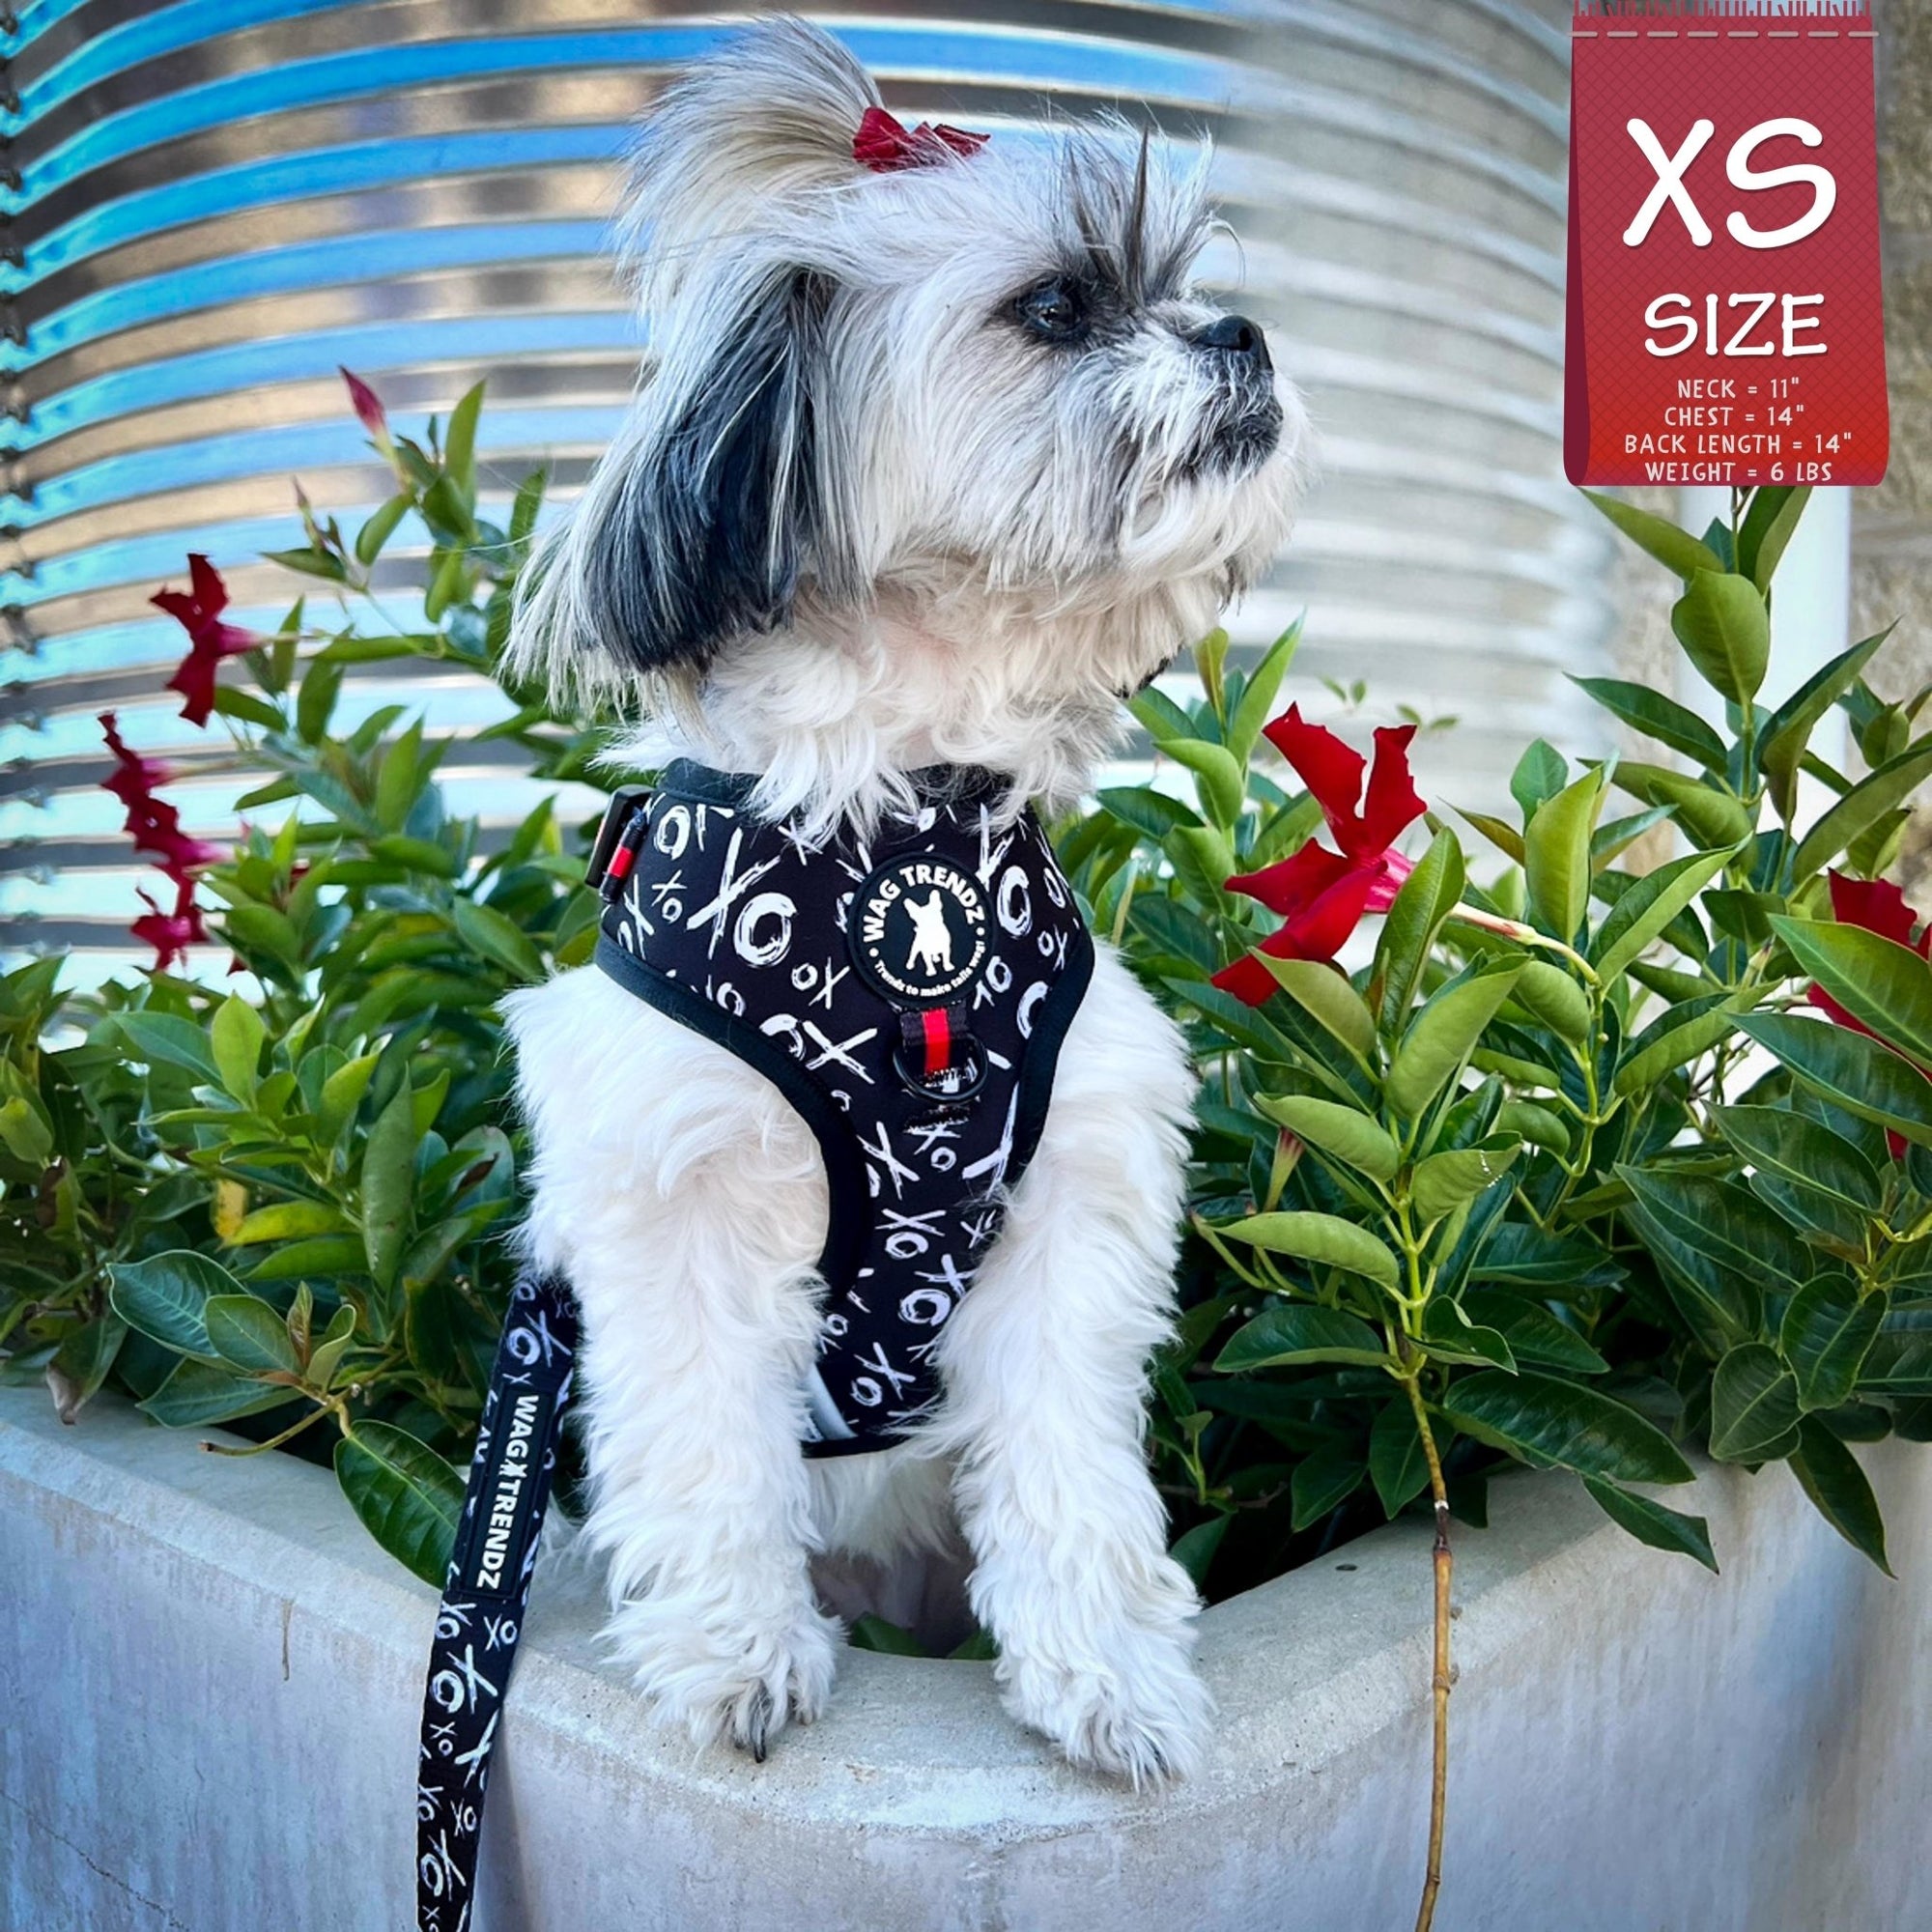 Dog Collar Harness and Leash Set - Small Dog wearing Dog Adjustable Harness in black and white XO&#39;s with bold red accents and matching leash attached - standing in red and green flowers with metal silo in background - Wag Trendz